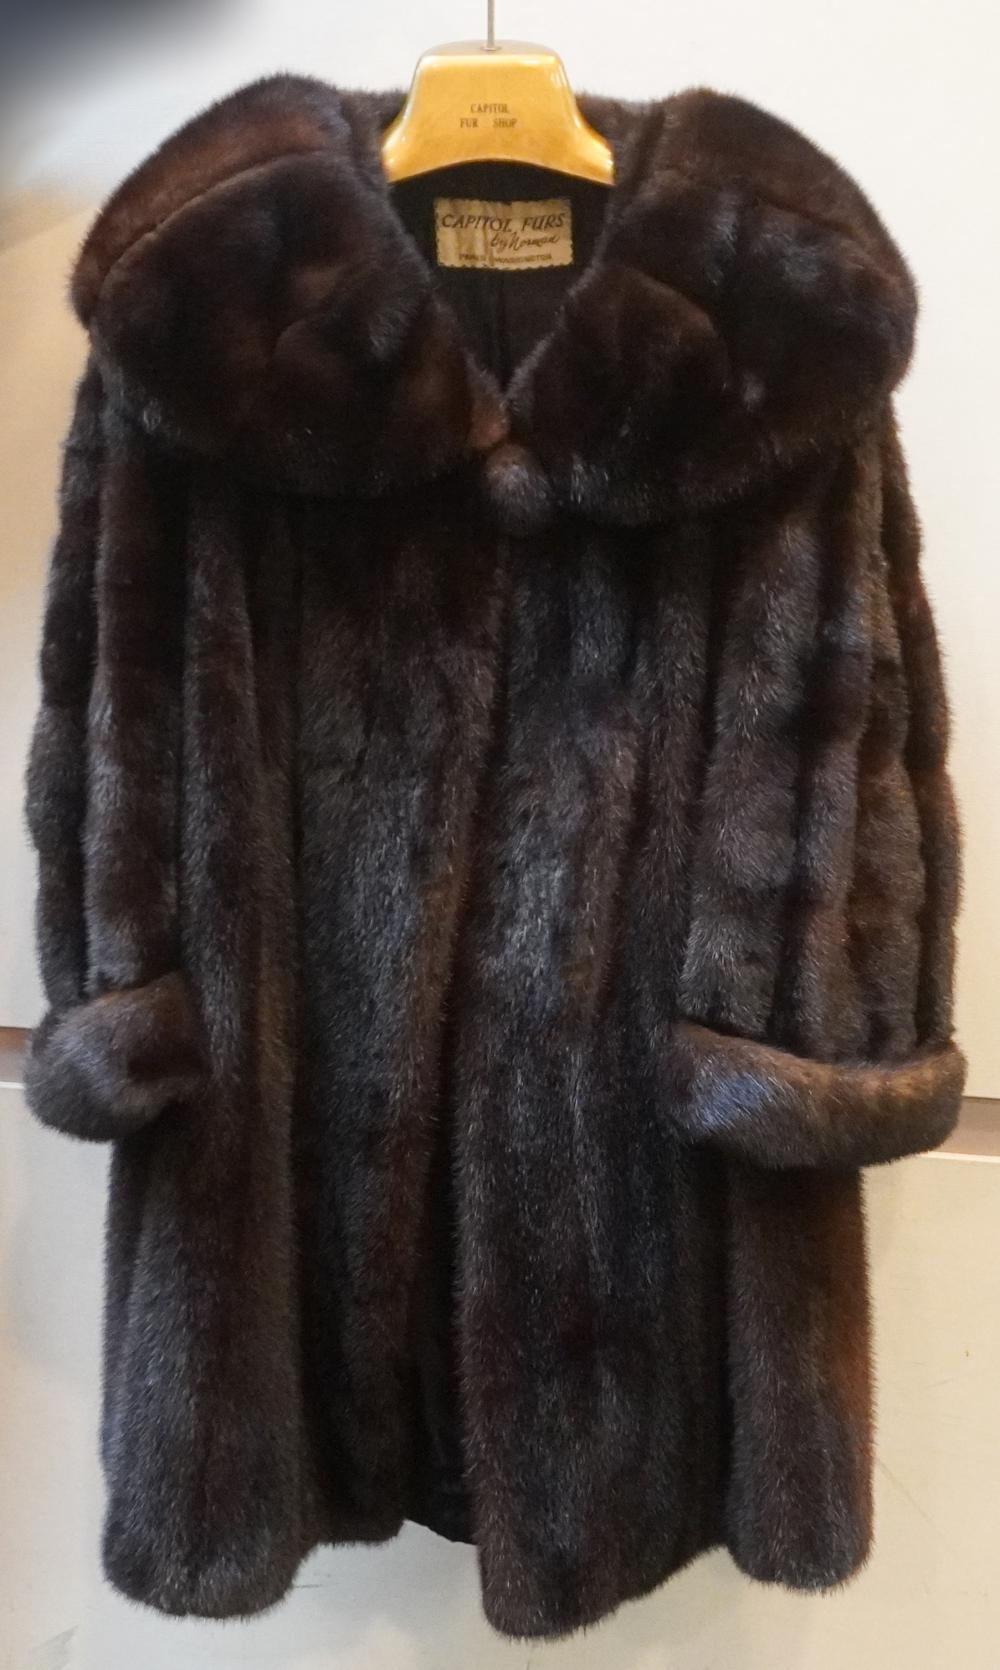 CAPITAL FURS BY NORMAN BROWN MINK